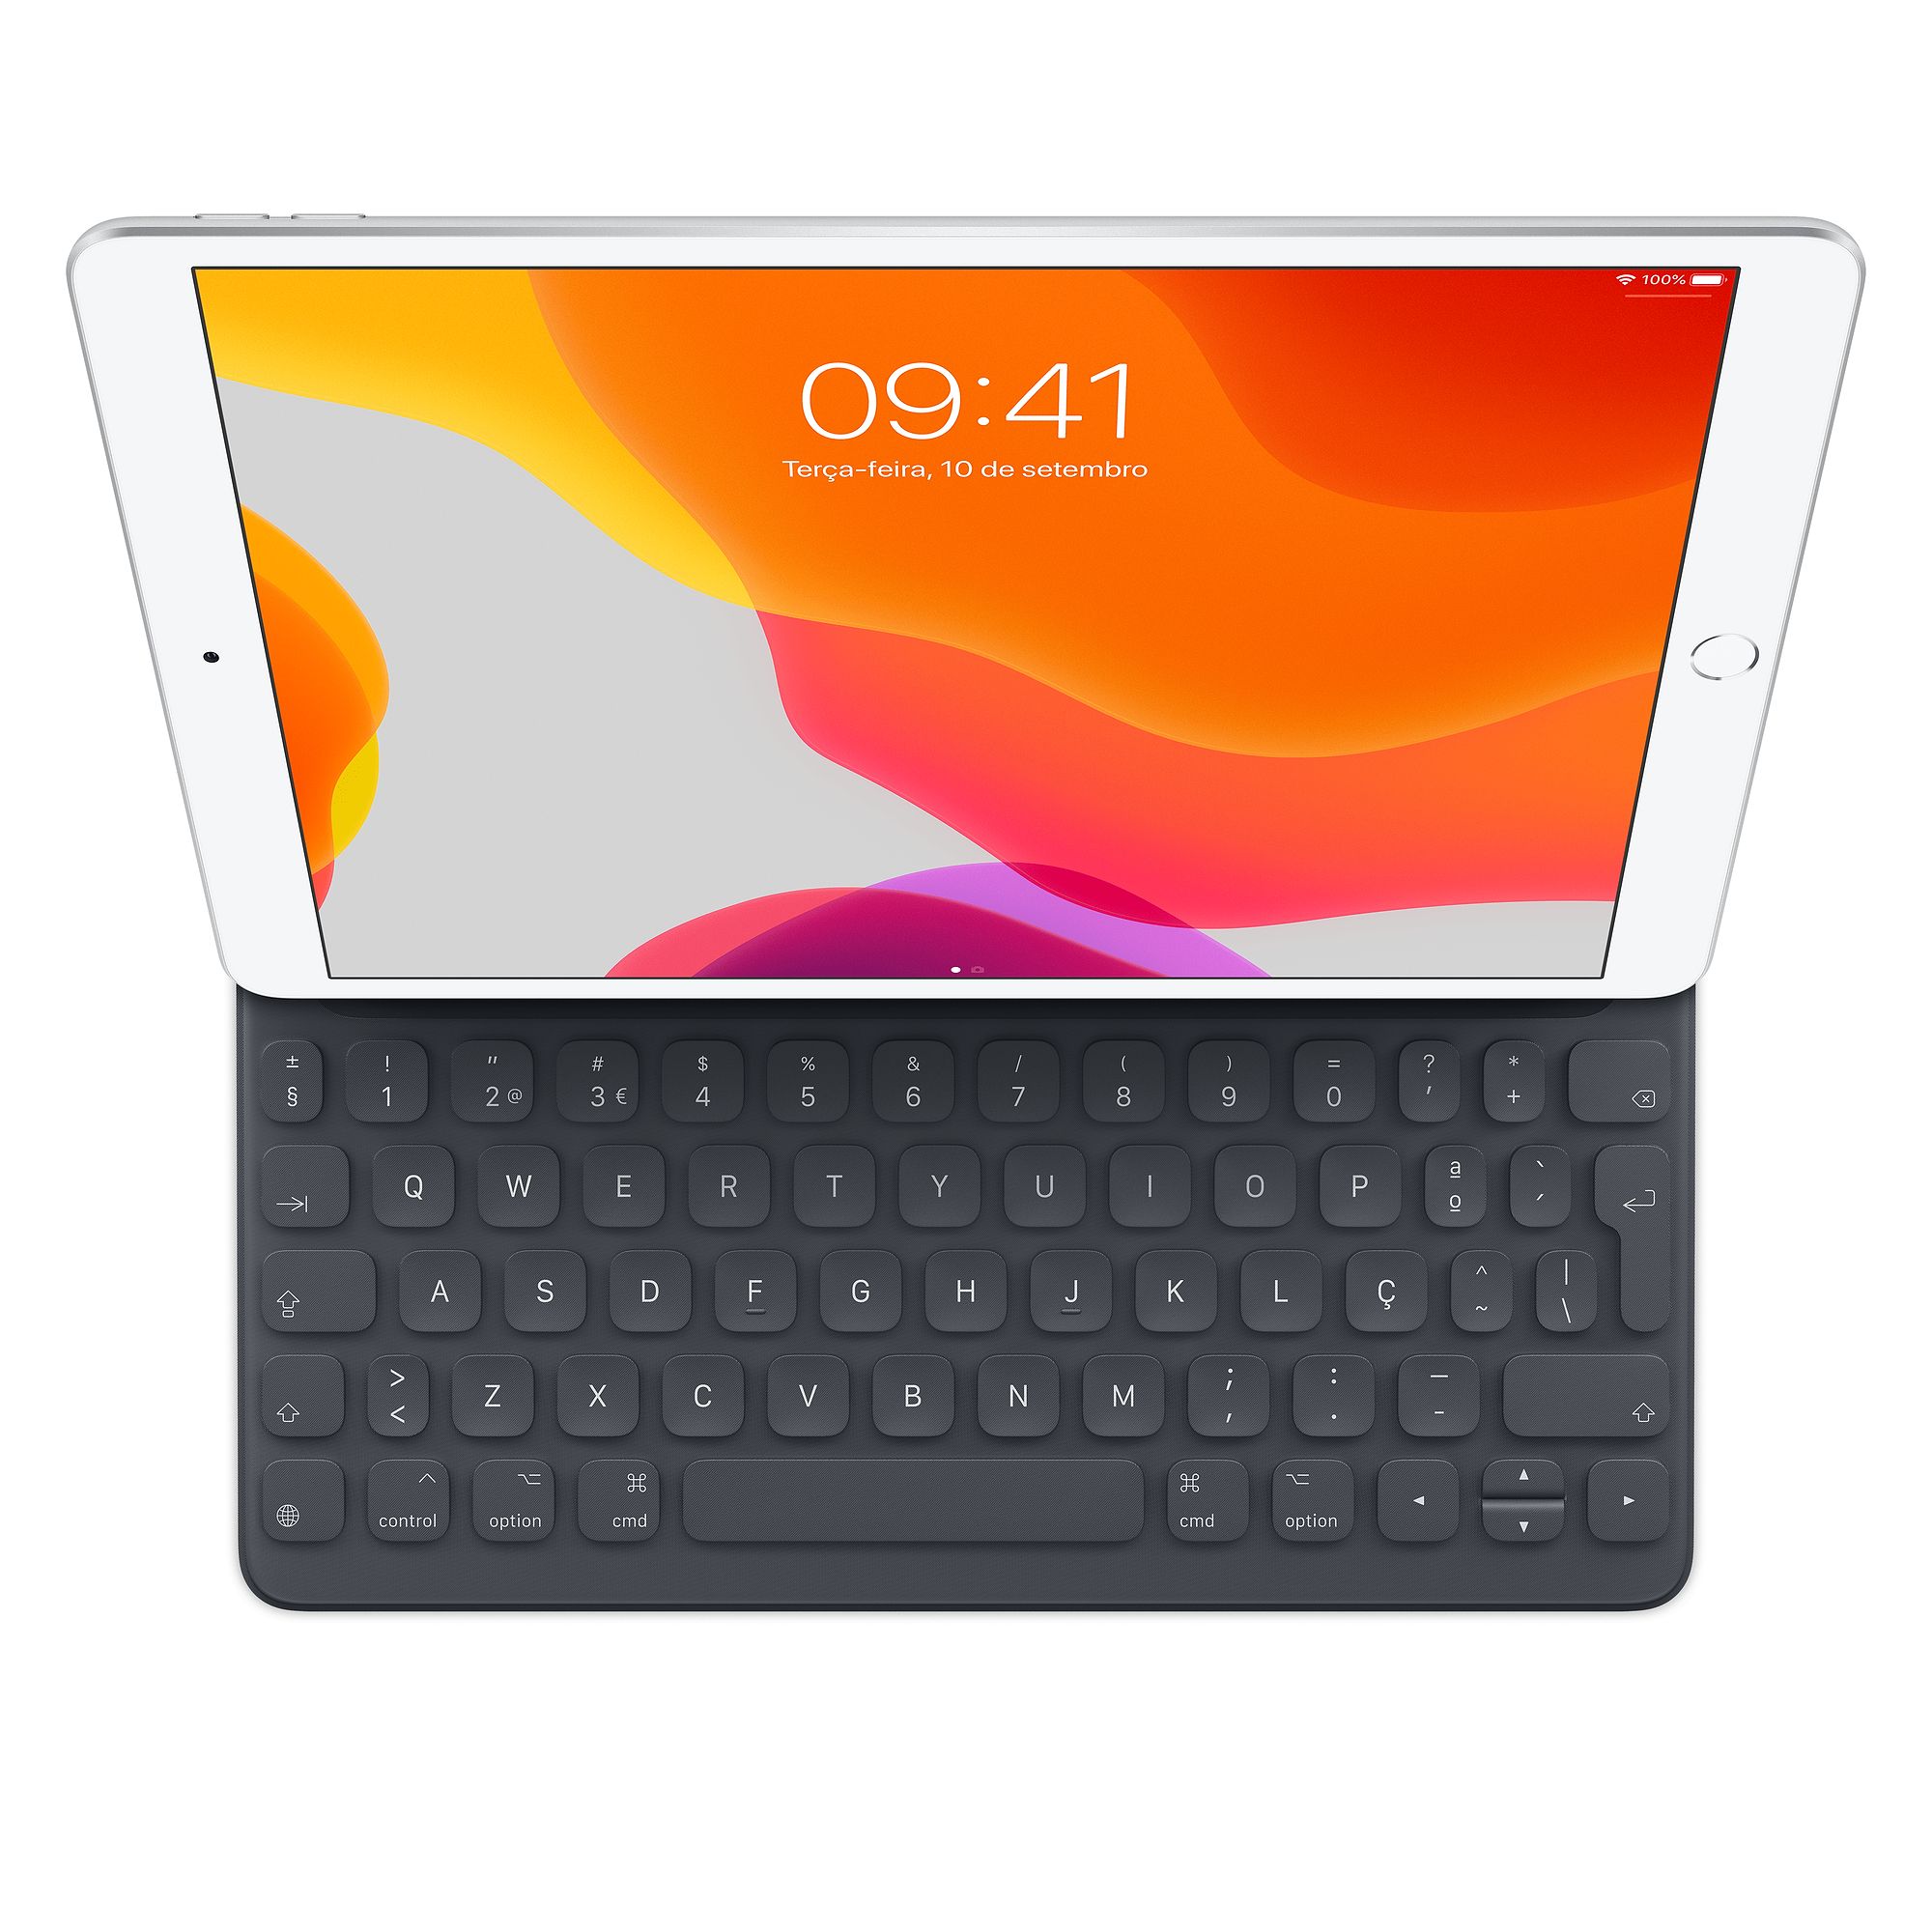 Apple may launch Smart Keyboard with trackpad later this year